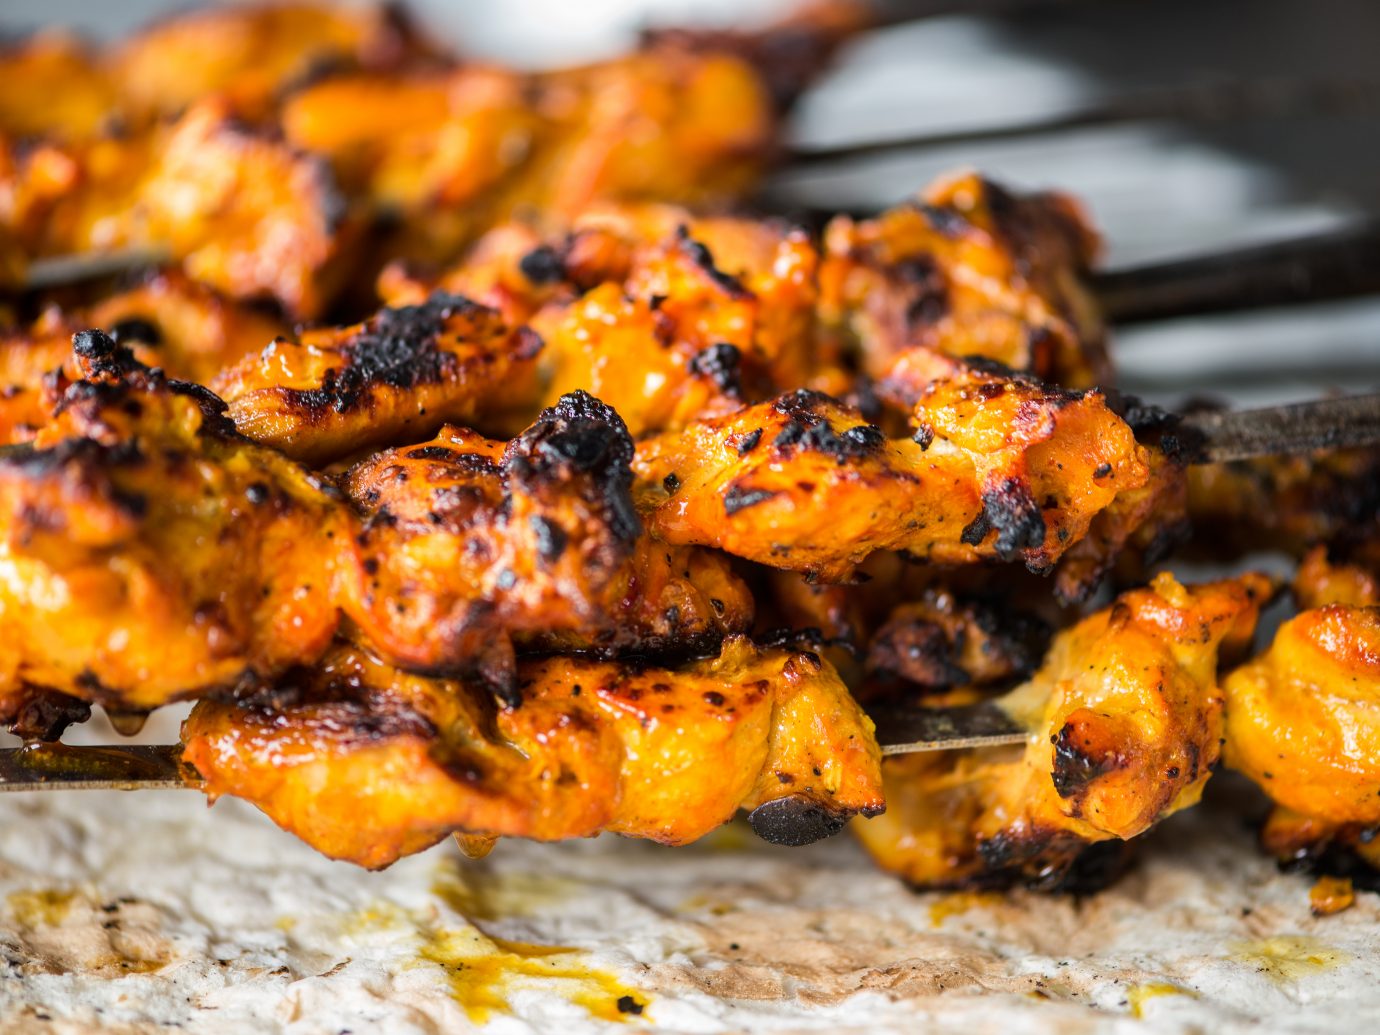 Closeup of freshly grilled chicken tikka masala kebabs on skewers dripping onto a piece of naan flatbread cooked in a Tandoori oven. Dubai, UAE, Middle East, GCC.